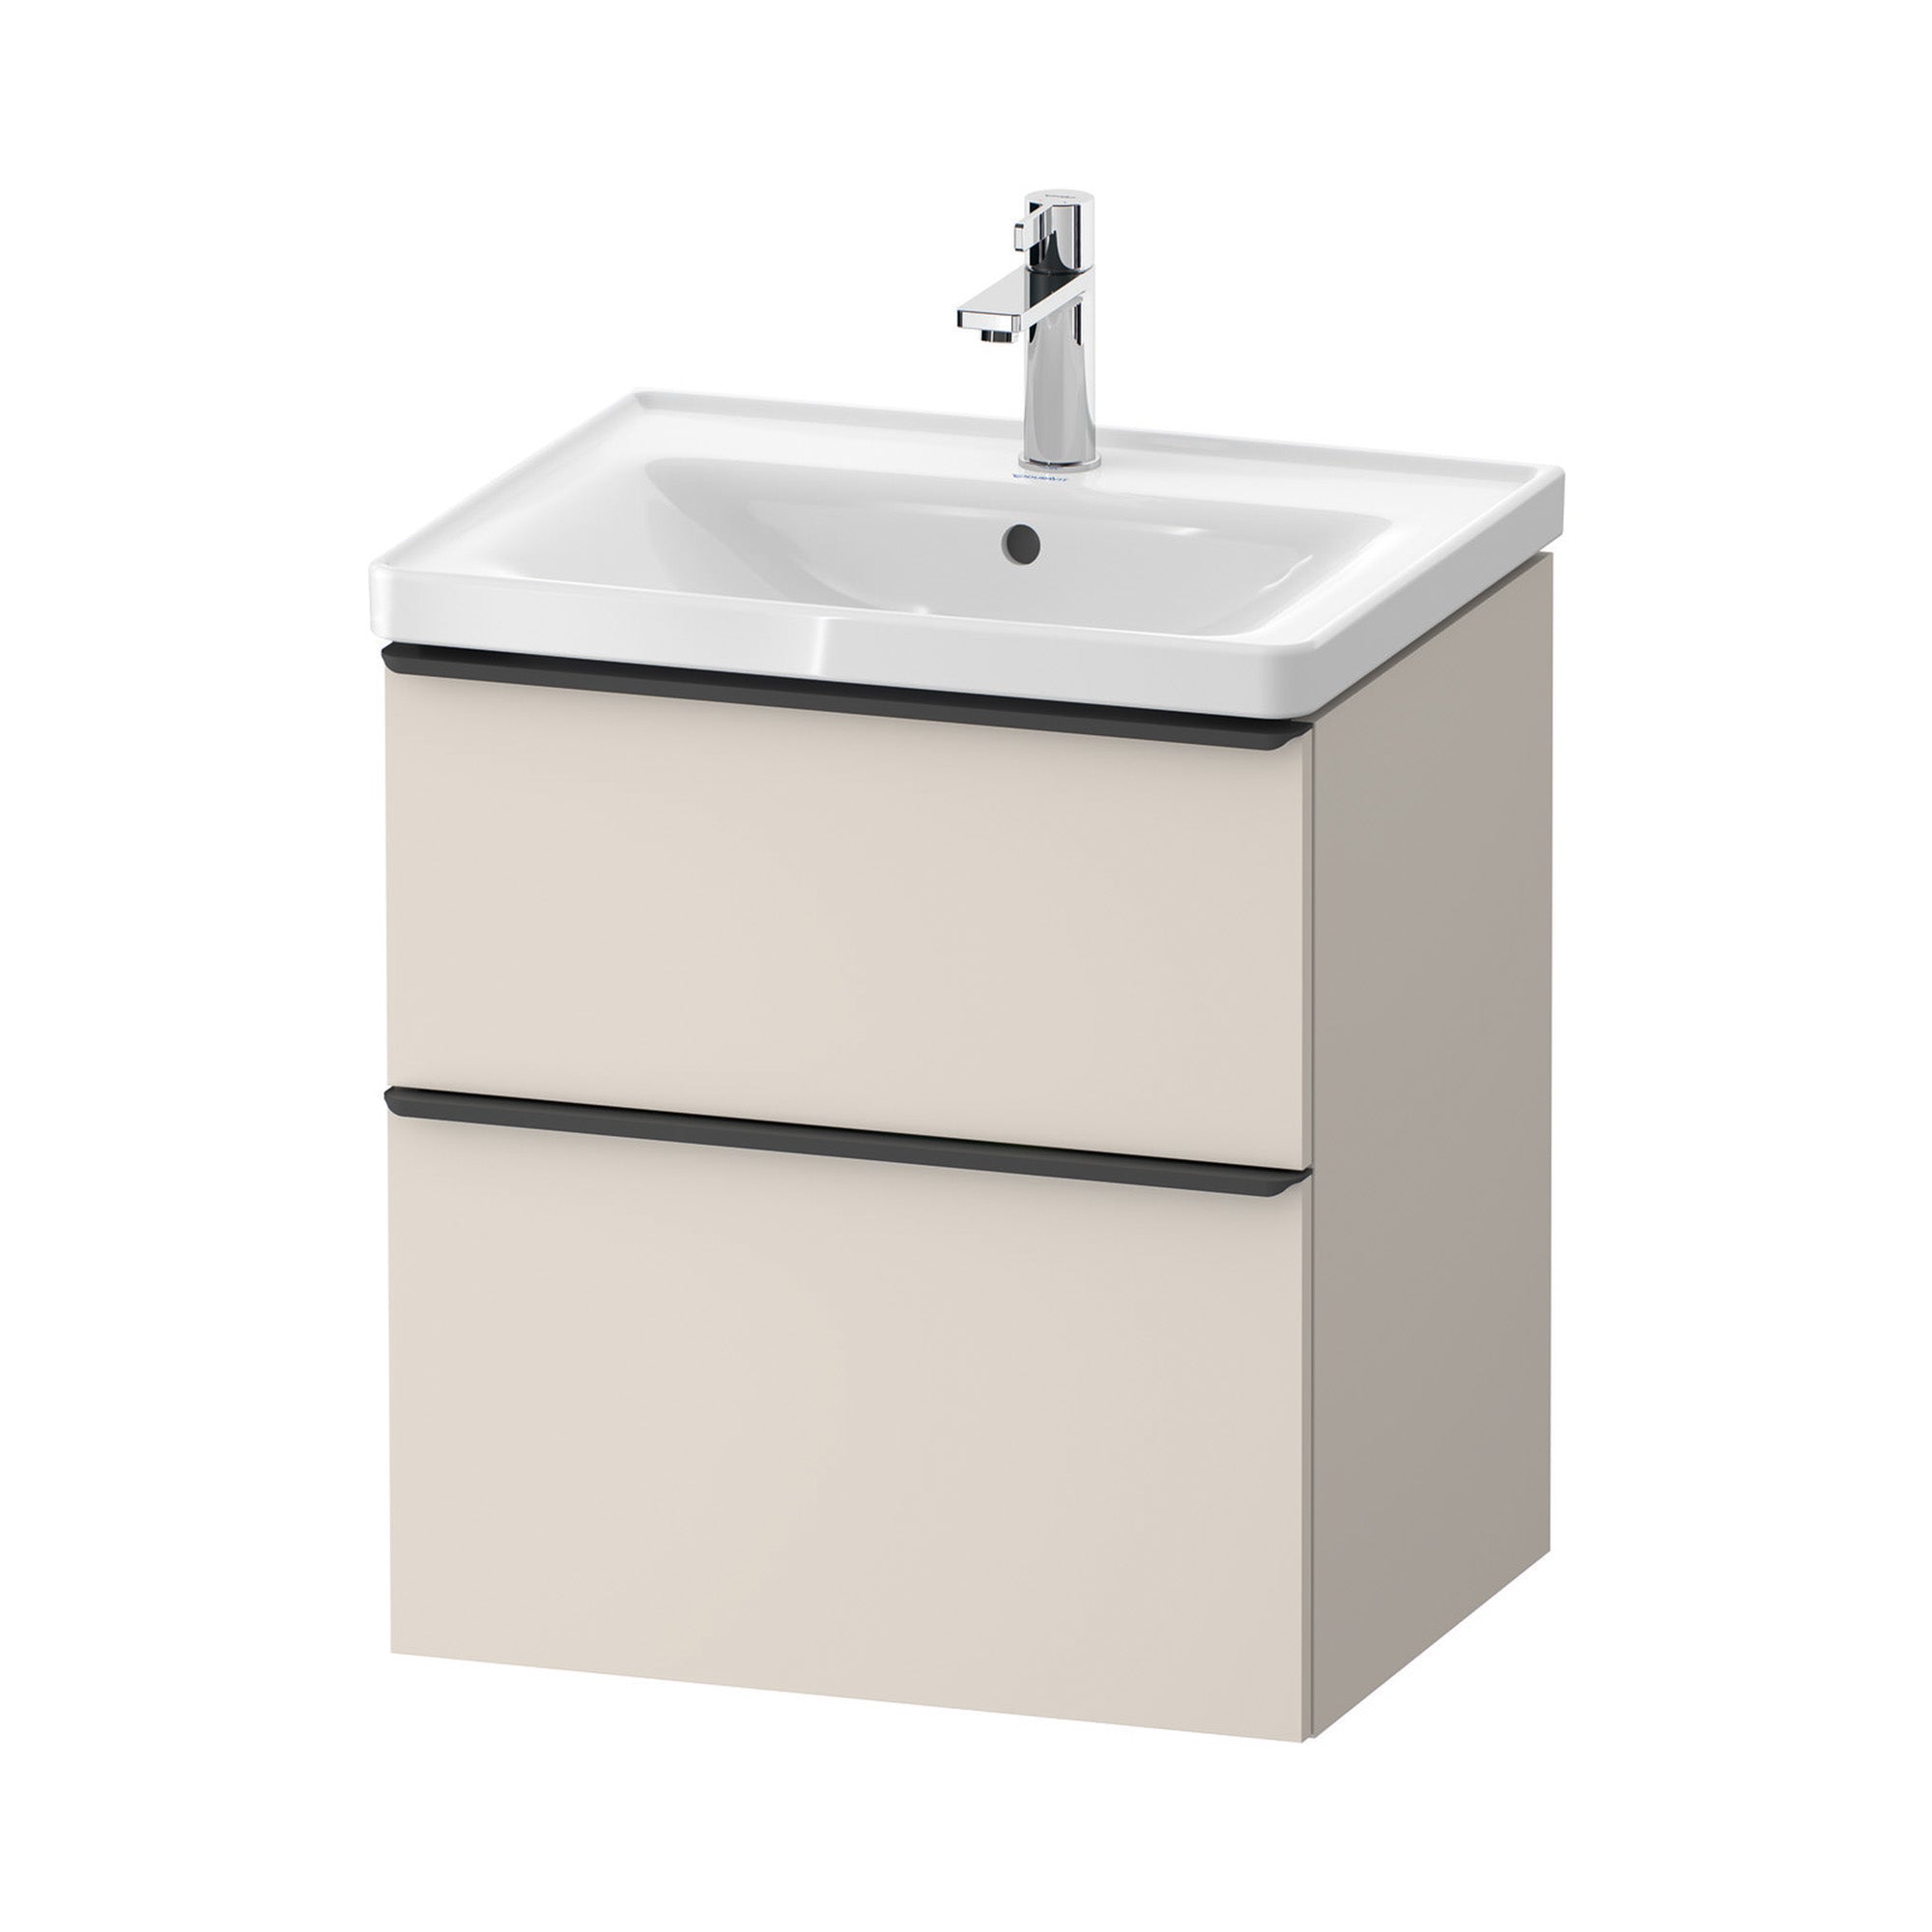 duravit d-neo 600 wall mounted vanity unit with d-neo basin taupe diamond black handles